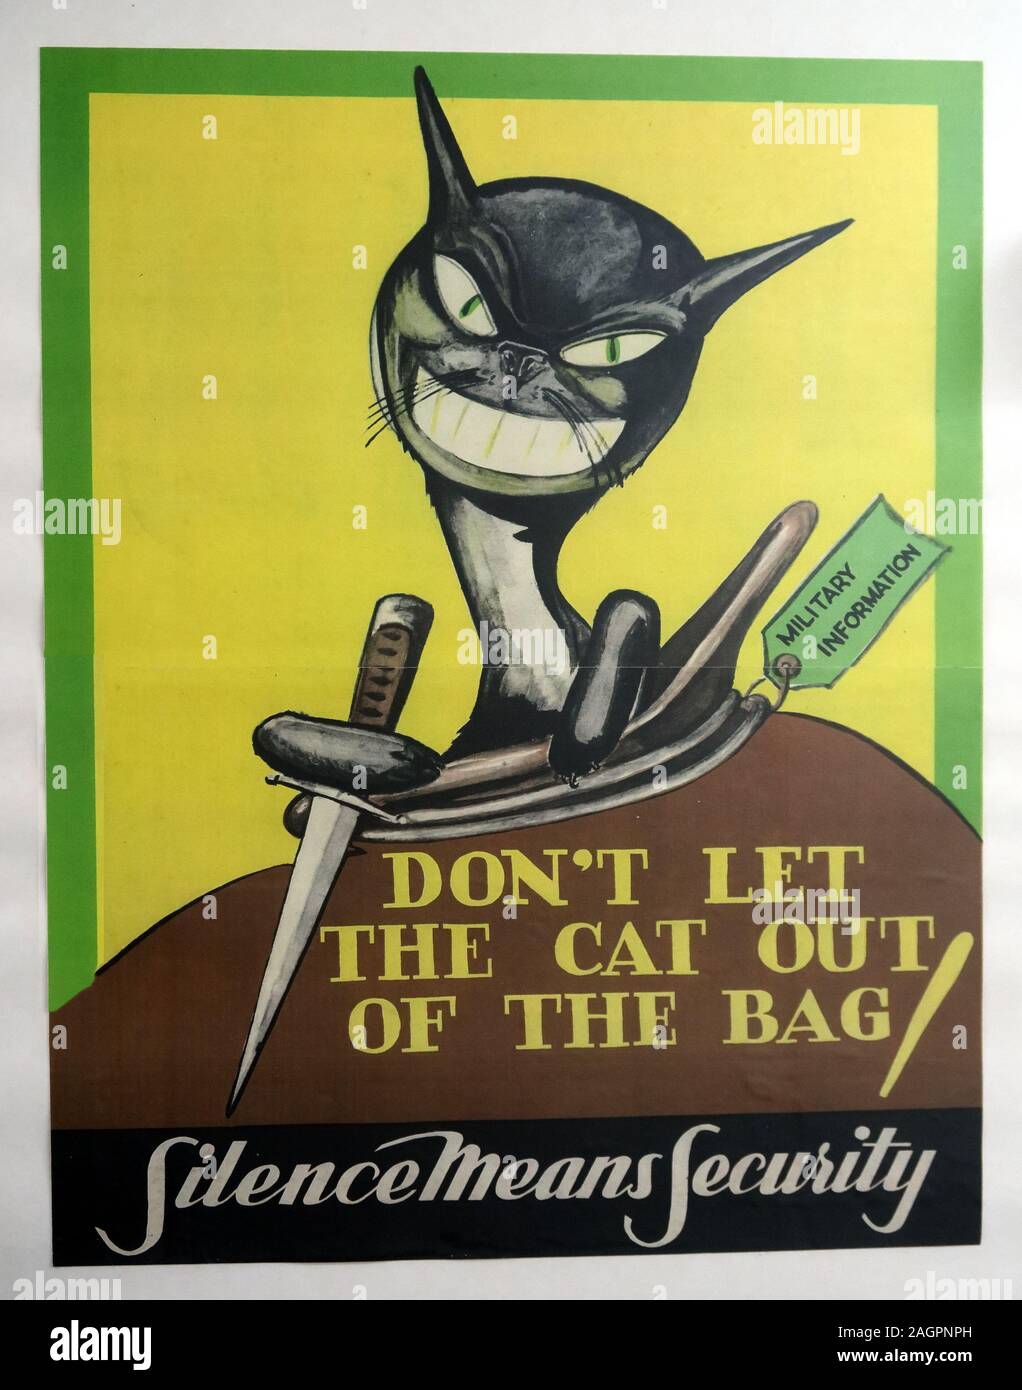 Poster - cat,military information, Don't let the cat out of the bag, Silence Means Security Stock Photo